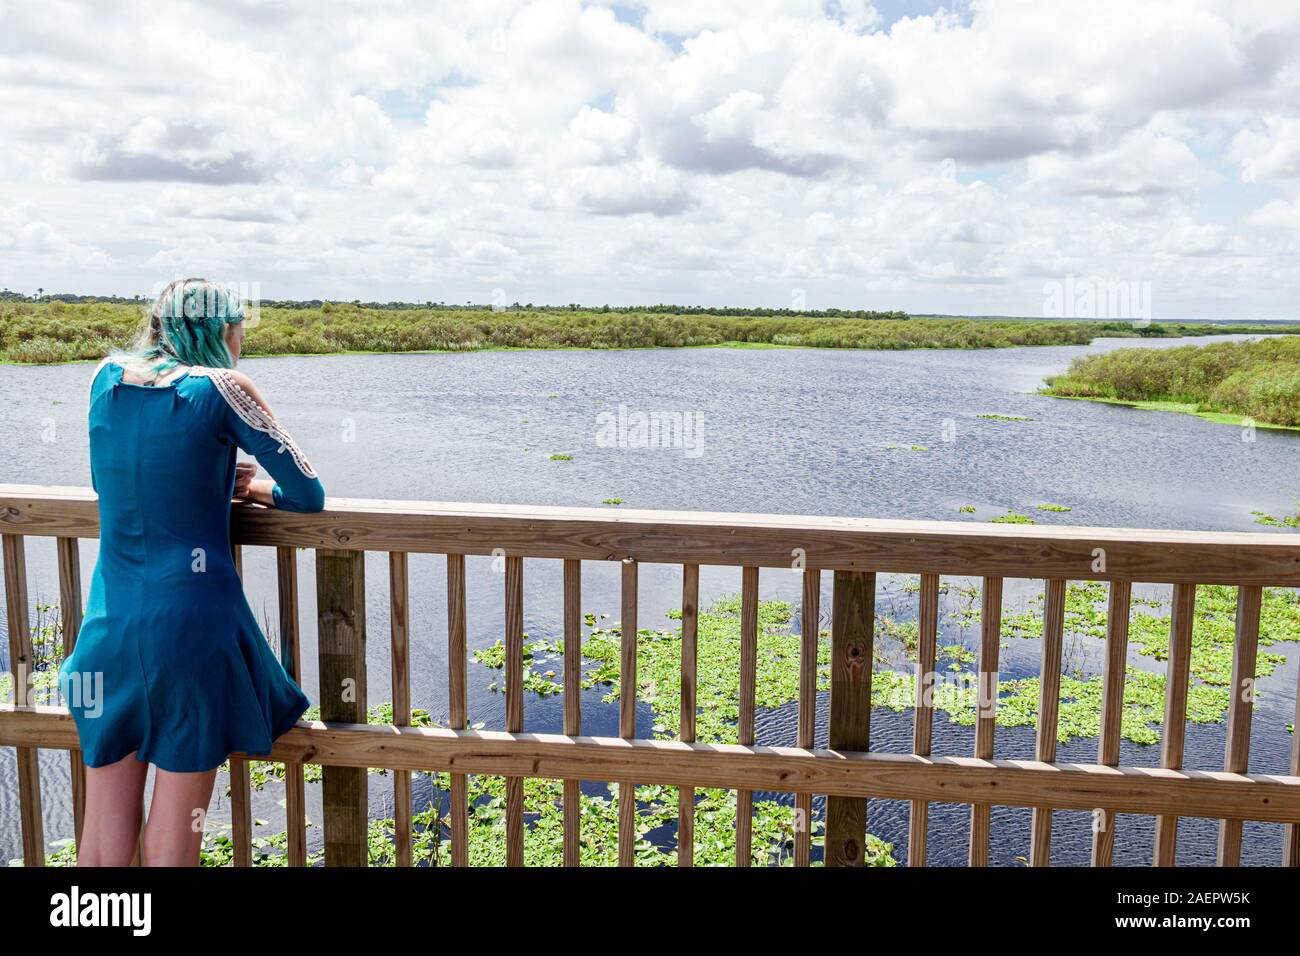 Melbourne Florida,St. Saint Johns River water,Camp Holly Airboat Rides,deck,teen teens teenage teenager teenagers youth adolescent,girl girls female k Stock Photo